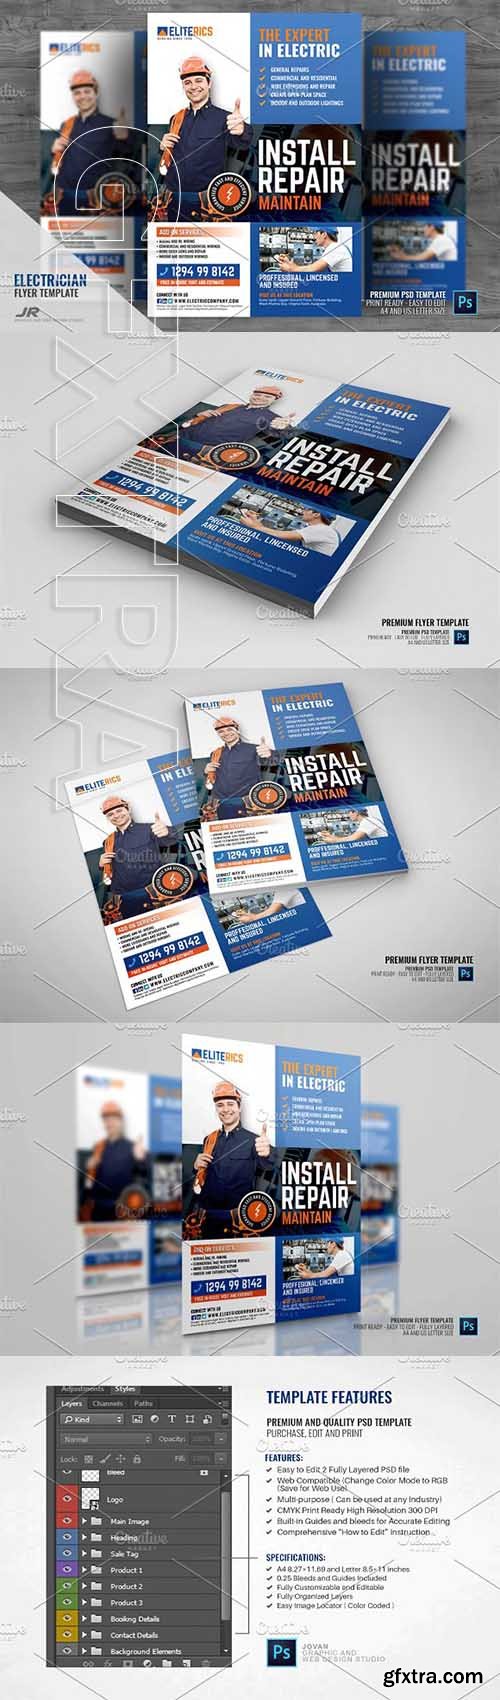 CreativeMarket - Electrical Services Company Flyer 2348668